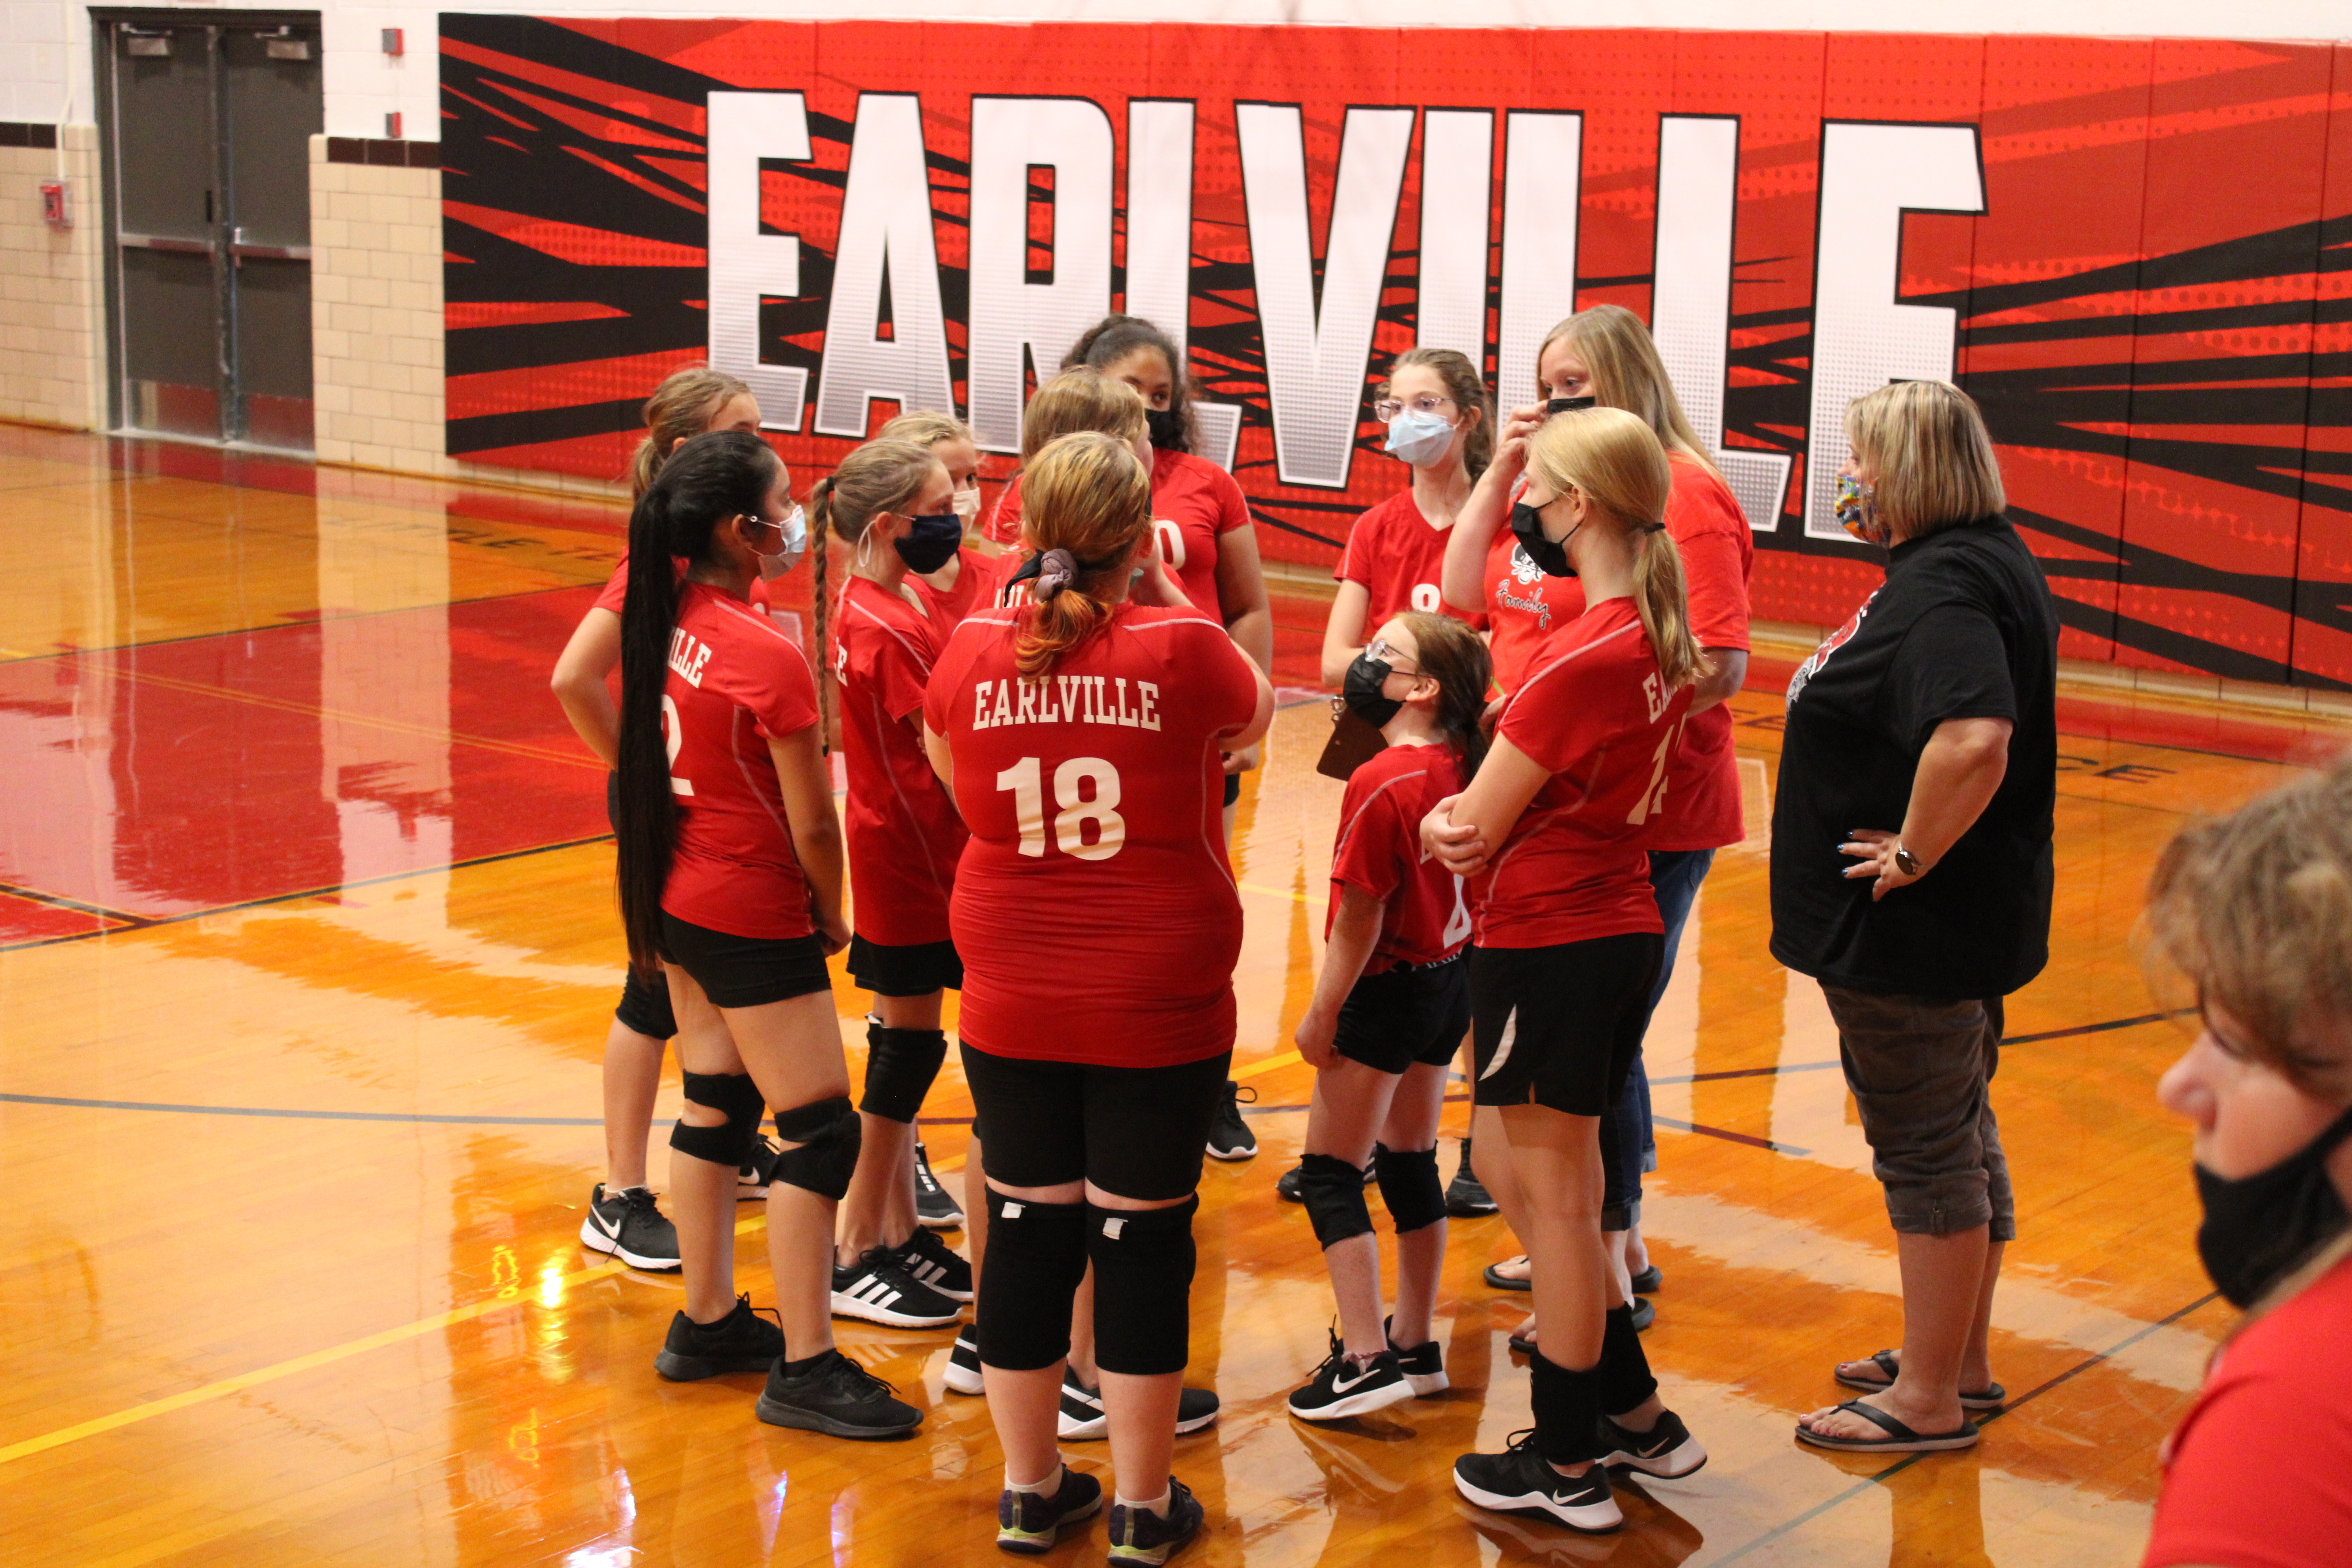 Volleyball Huddle